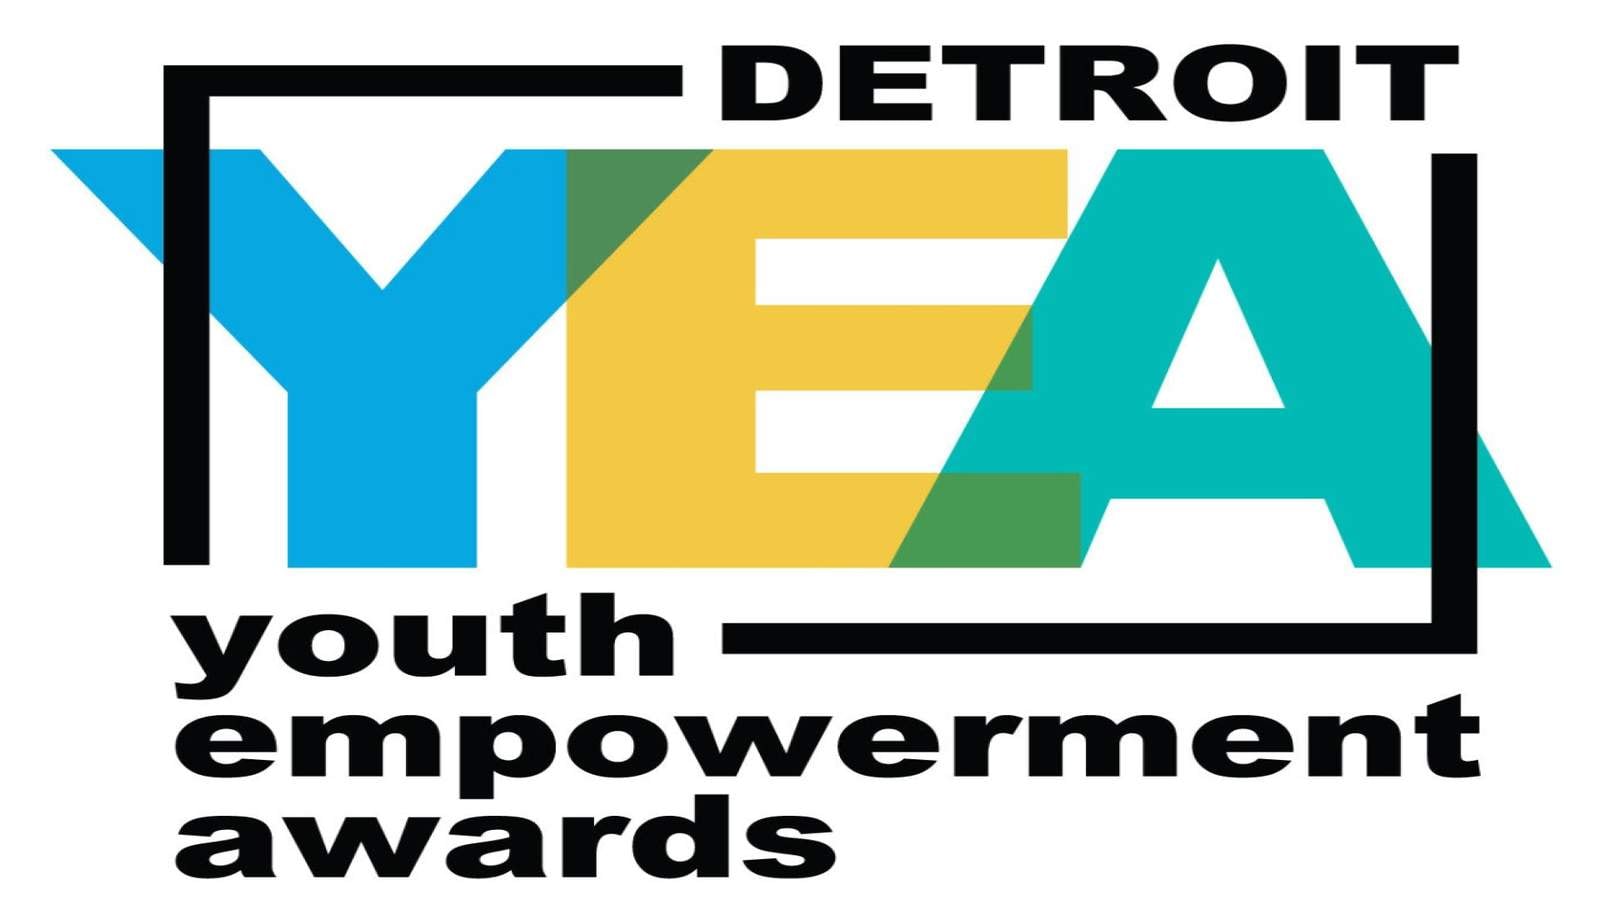 New event recognizes exceptional young people in Detroit